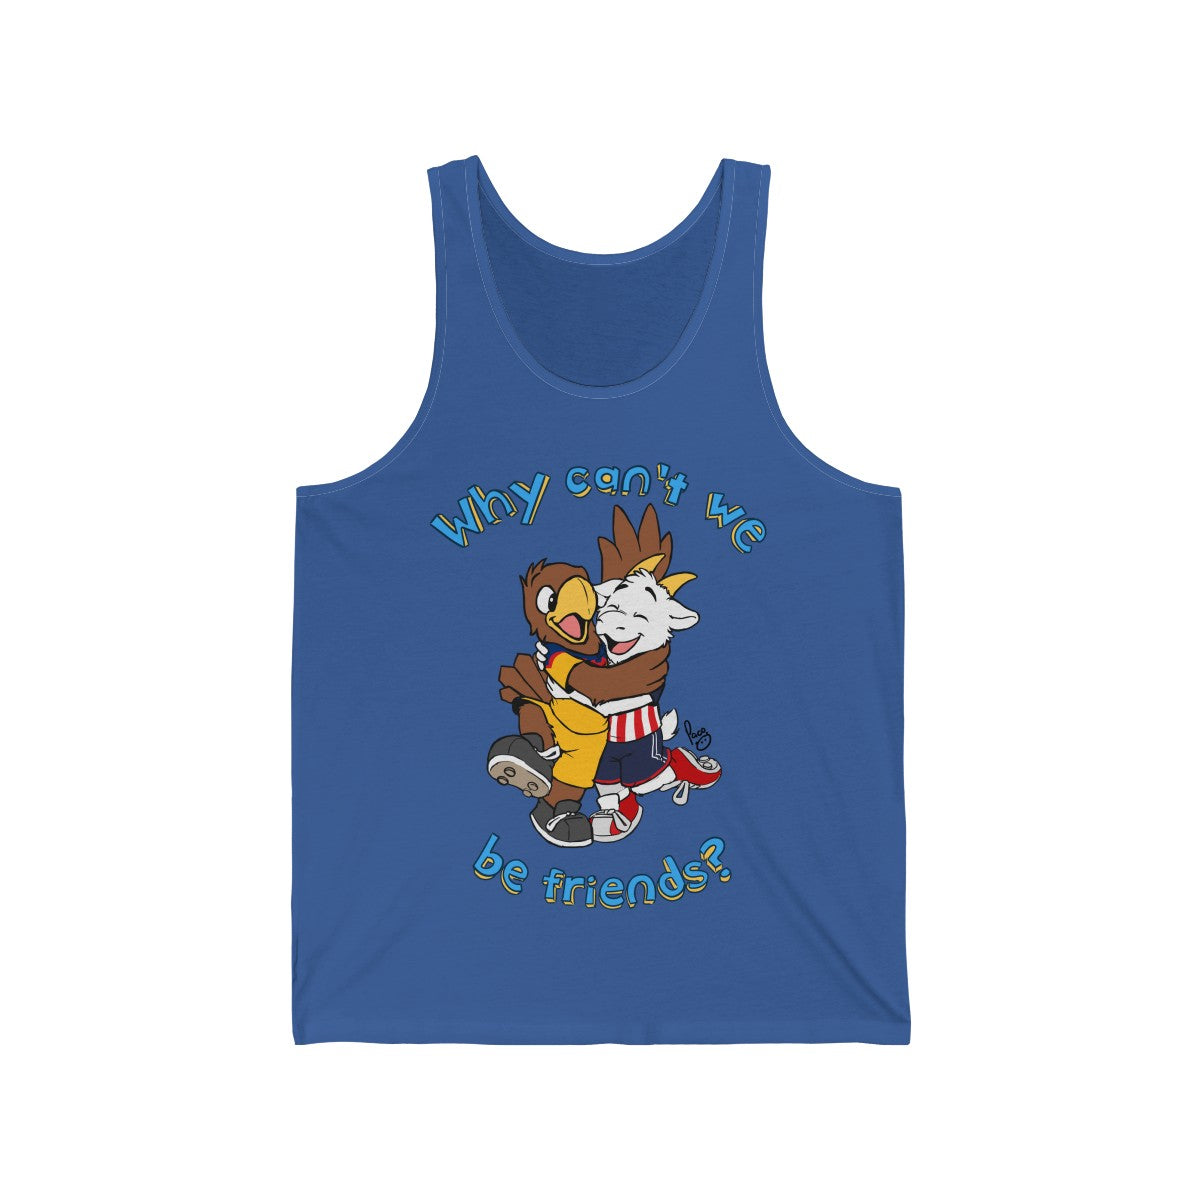 Why Can't we be Friends? - Tank Top Tank Top Paco Panda Royal Blue XS 